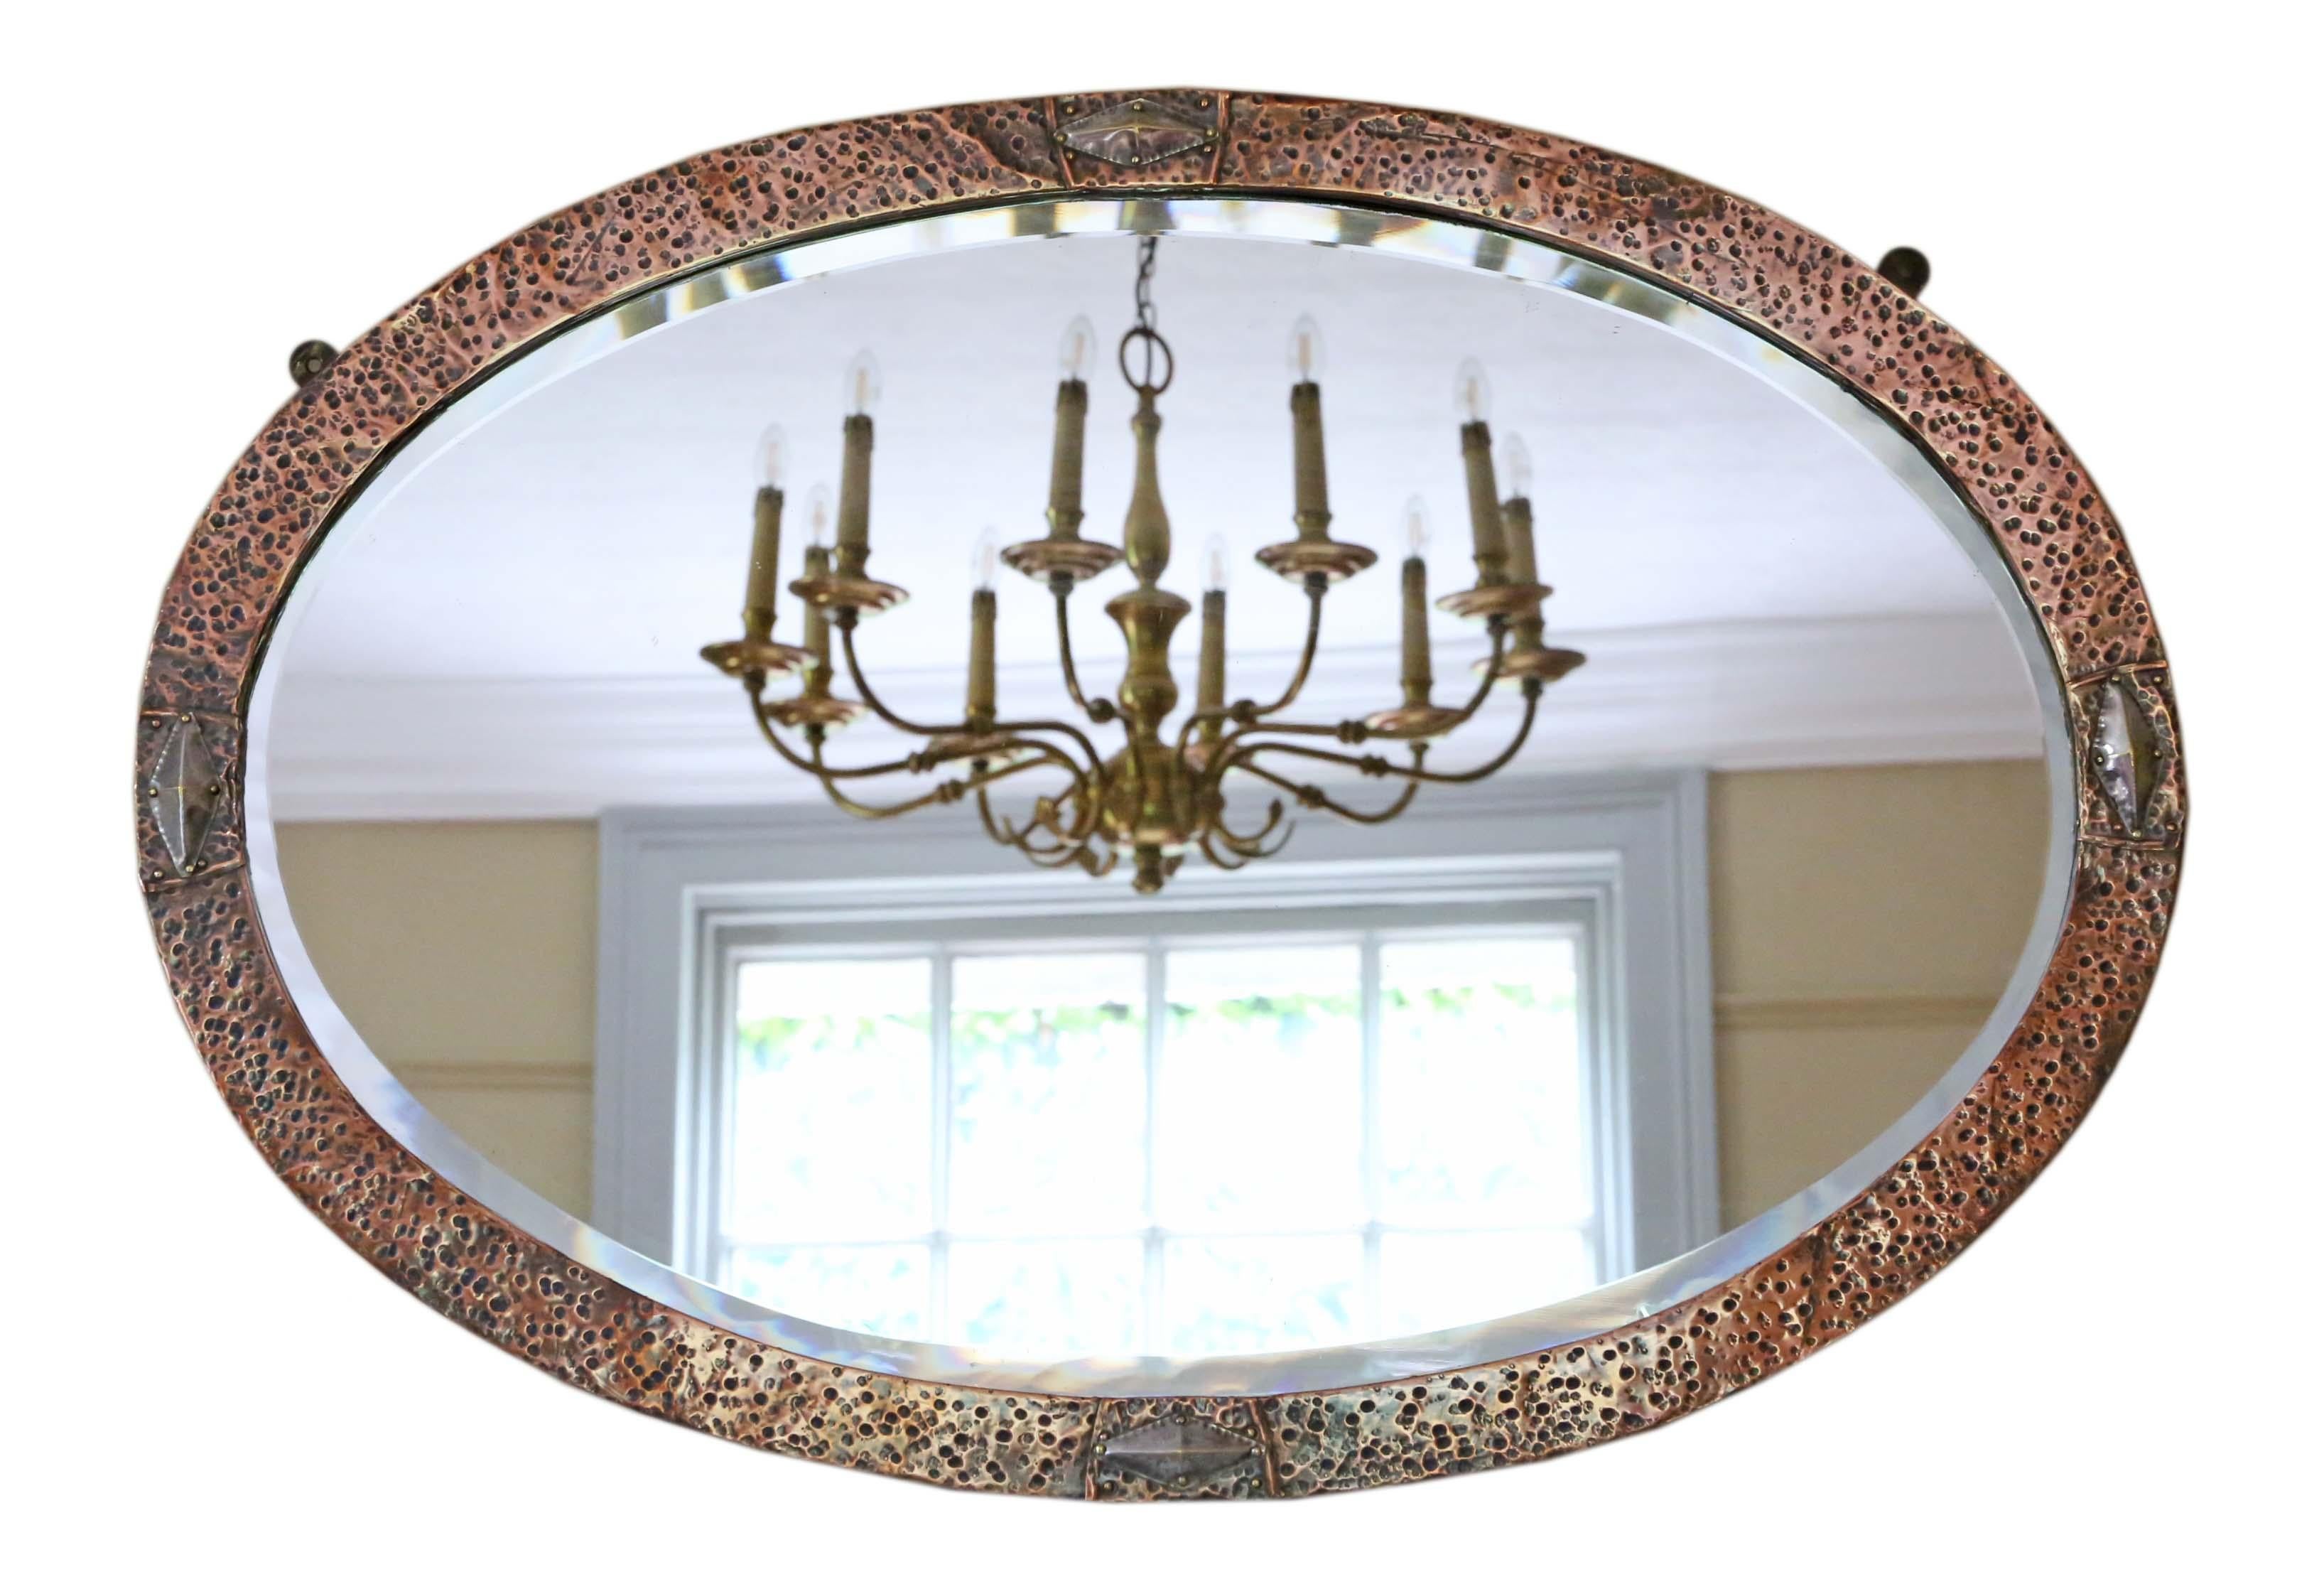 Early 20th Century Oval Art Nouveau Copper and Brass Wall Overmantle Mirror For Sale